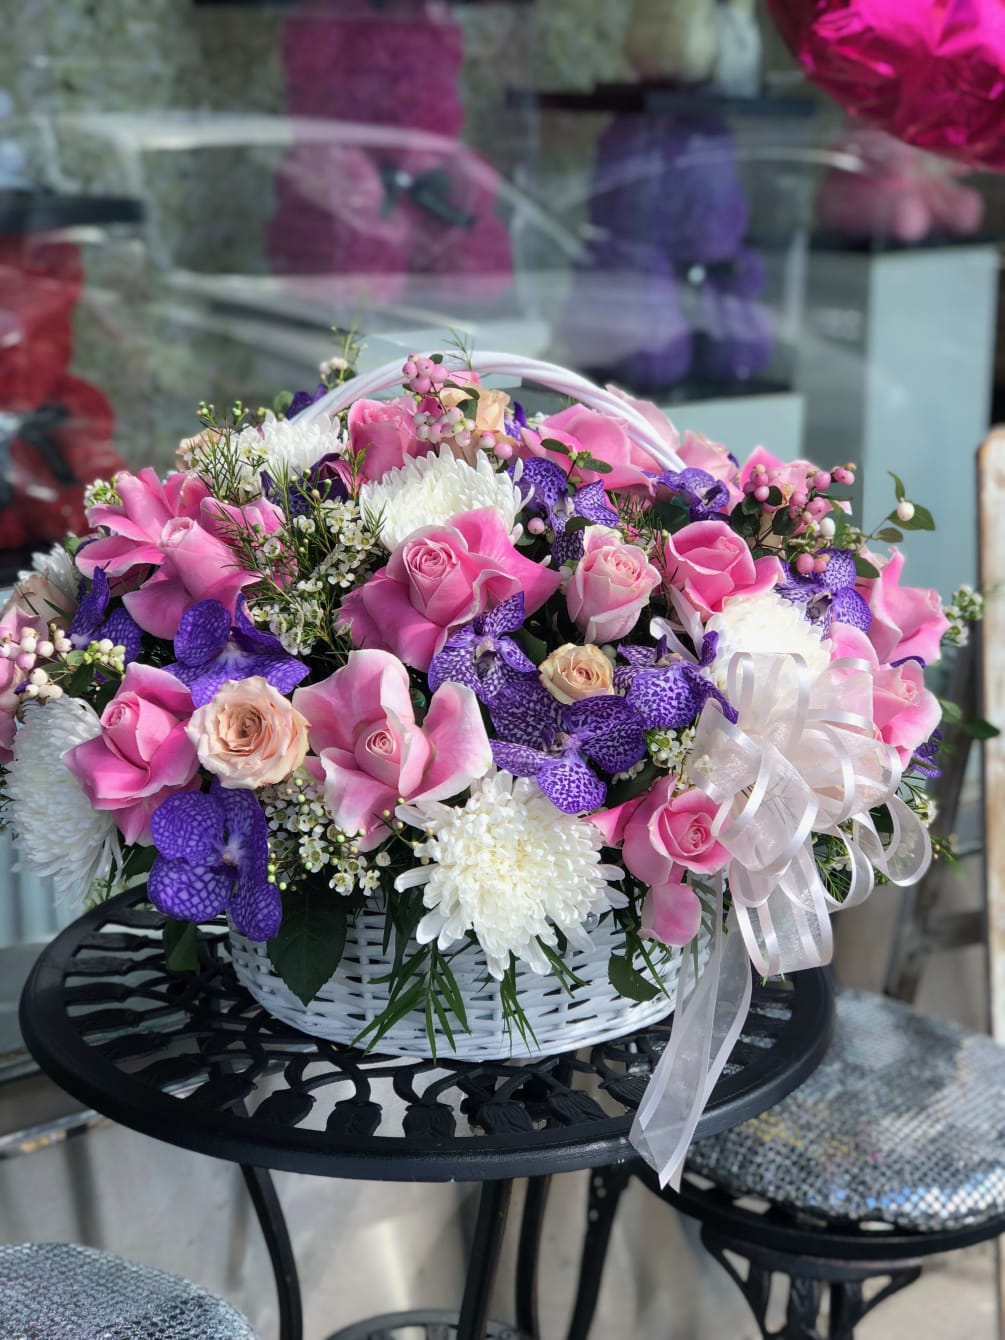 A FULL BASKET WITH MIXED ROSES ,VANDA ORCHIDS,ROSES AND SPRAY ROSES 